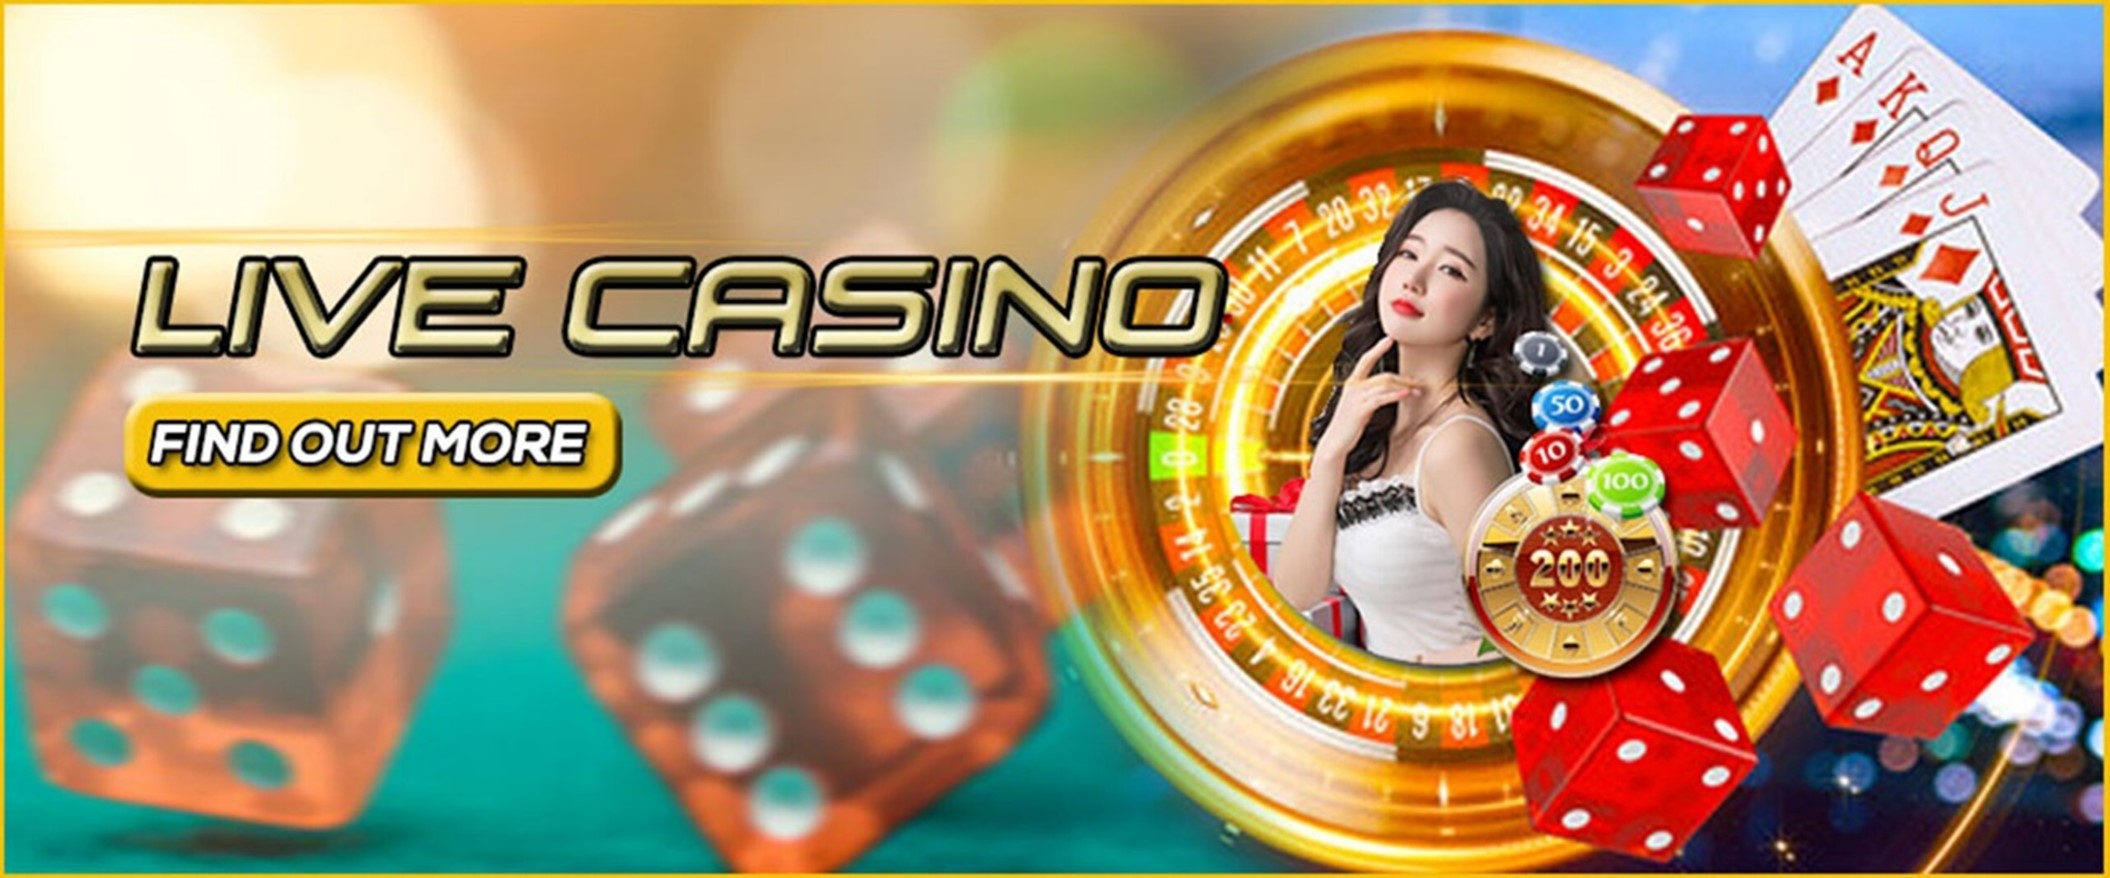 In-Play Gaming with Live Casino Bonuses: Wagering in Real Time